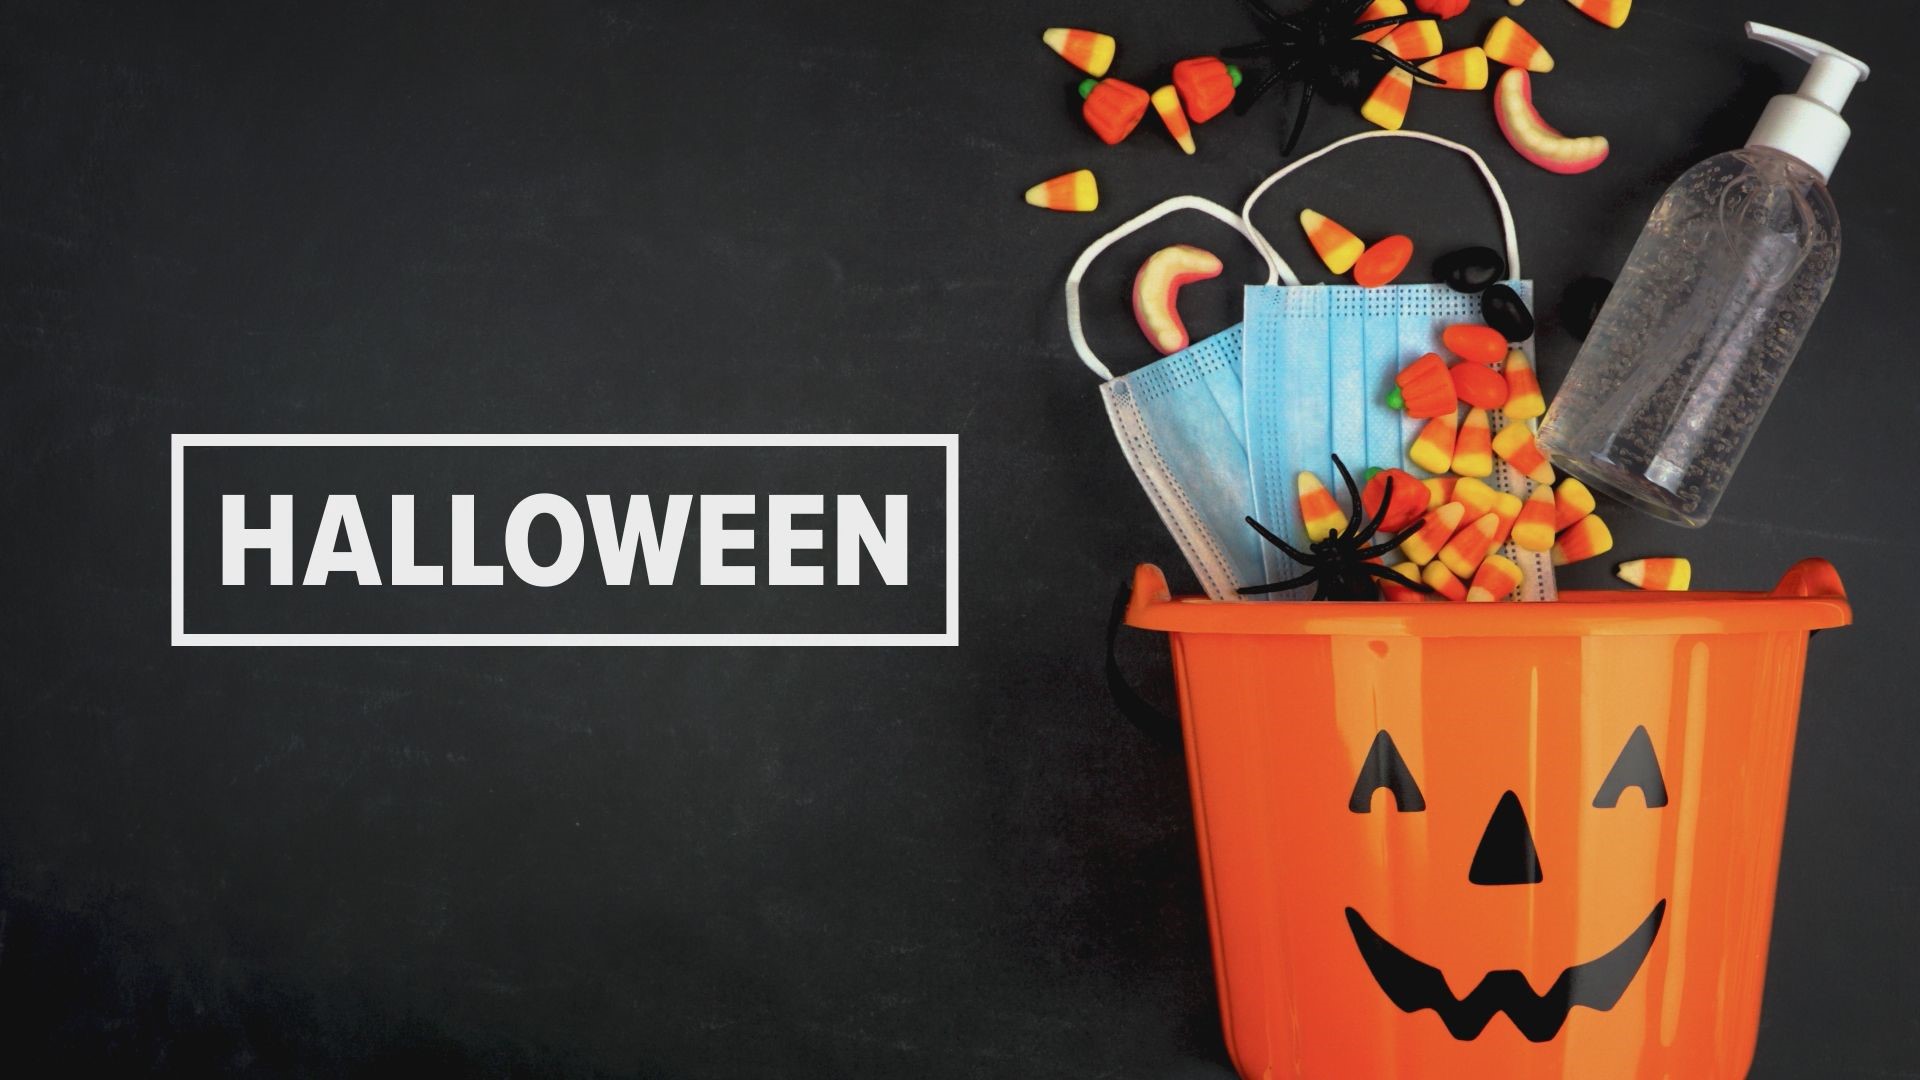 The city has reserved Saturday, Oct. 30 from 6 p.m. to 9 p.m. for trick-or-treaters and those who want to pass out candy or treats.